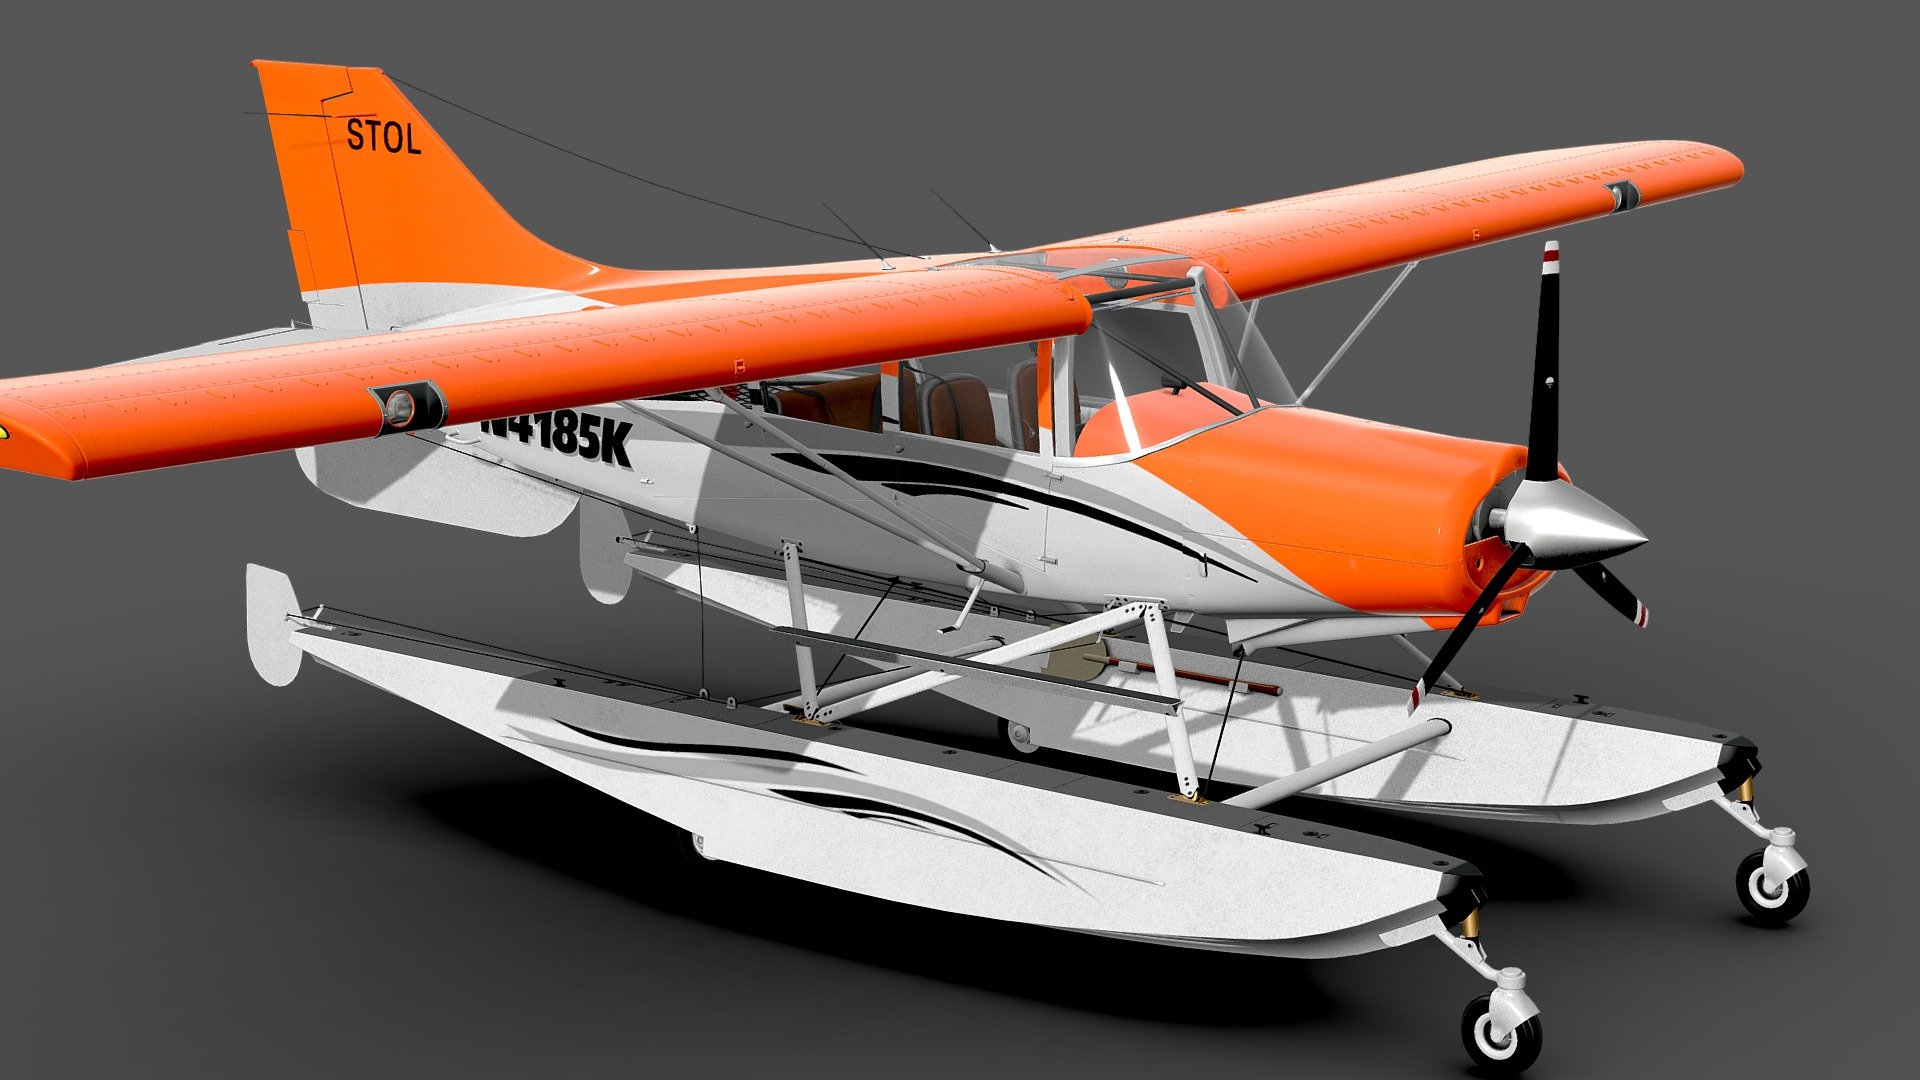 Maule M-7-235 hydroplane . This is a beautiful 3D model, prepared with attention to detail and hardware performance.

Super Rocket,detailed exterior.

detailed interior,
 textured (4k-2k) and UVW unwrapped - every object has material's name, you can easily change or apply materials - max format:

3ds max 2016 with VRay materials
 3ds max 2016 with Corona materials

maya format: - Maya 2018 with Default materials
 .obj format

.fbx format

All textures are included in the .zip file.

Capacity: four passengers

Length: 23.67 ft (7.21 m)
 Wingspan: 32.92 ft (10.03 m)
 Height: 6.33 ft (1.93 m)
 Empty weight: 1,549 lb (703 kg) typical, equipped
 Gross weight: 2,500 lb (1,134 kg)
 Fuel capacity: 40 U.S. gallons (150 L; 33 imp gal) usable (standard)

Best Regards 3d model